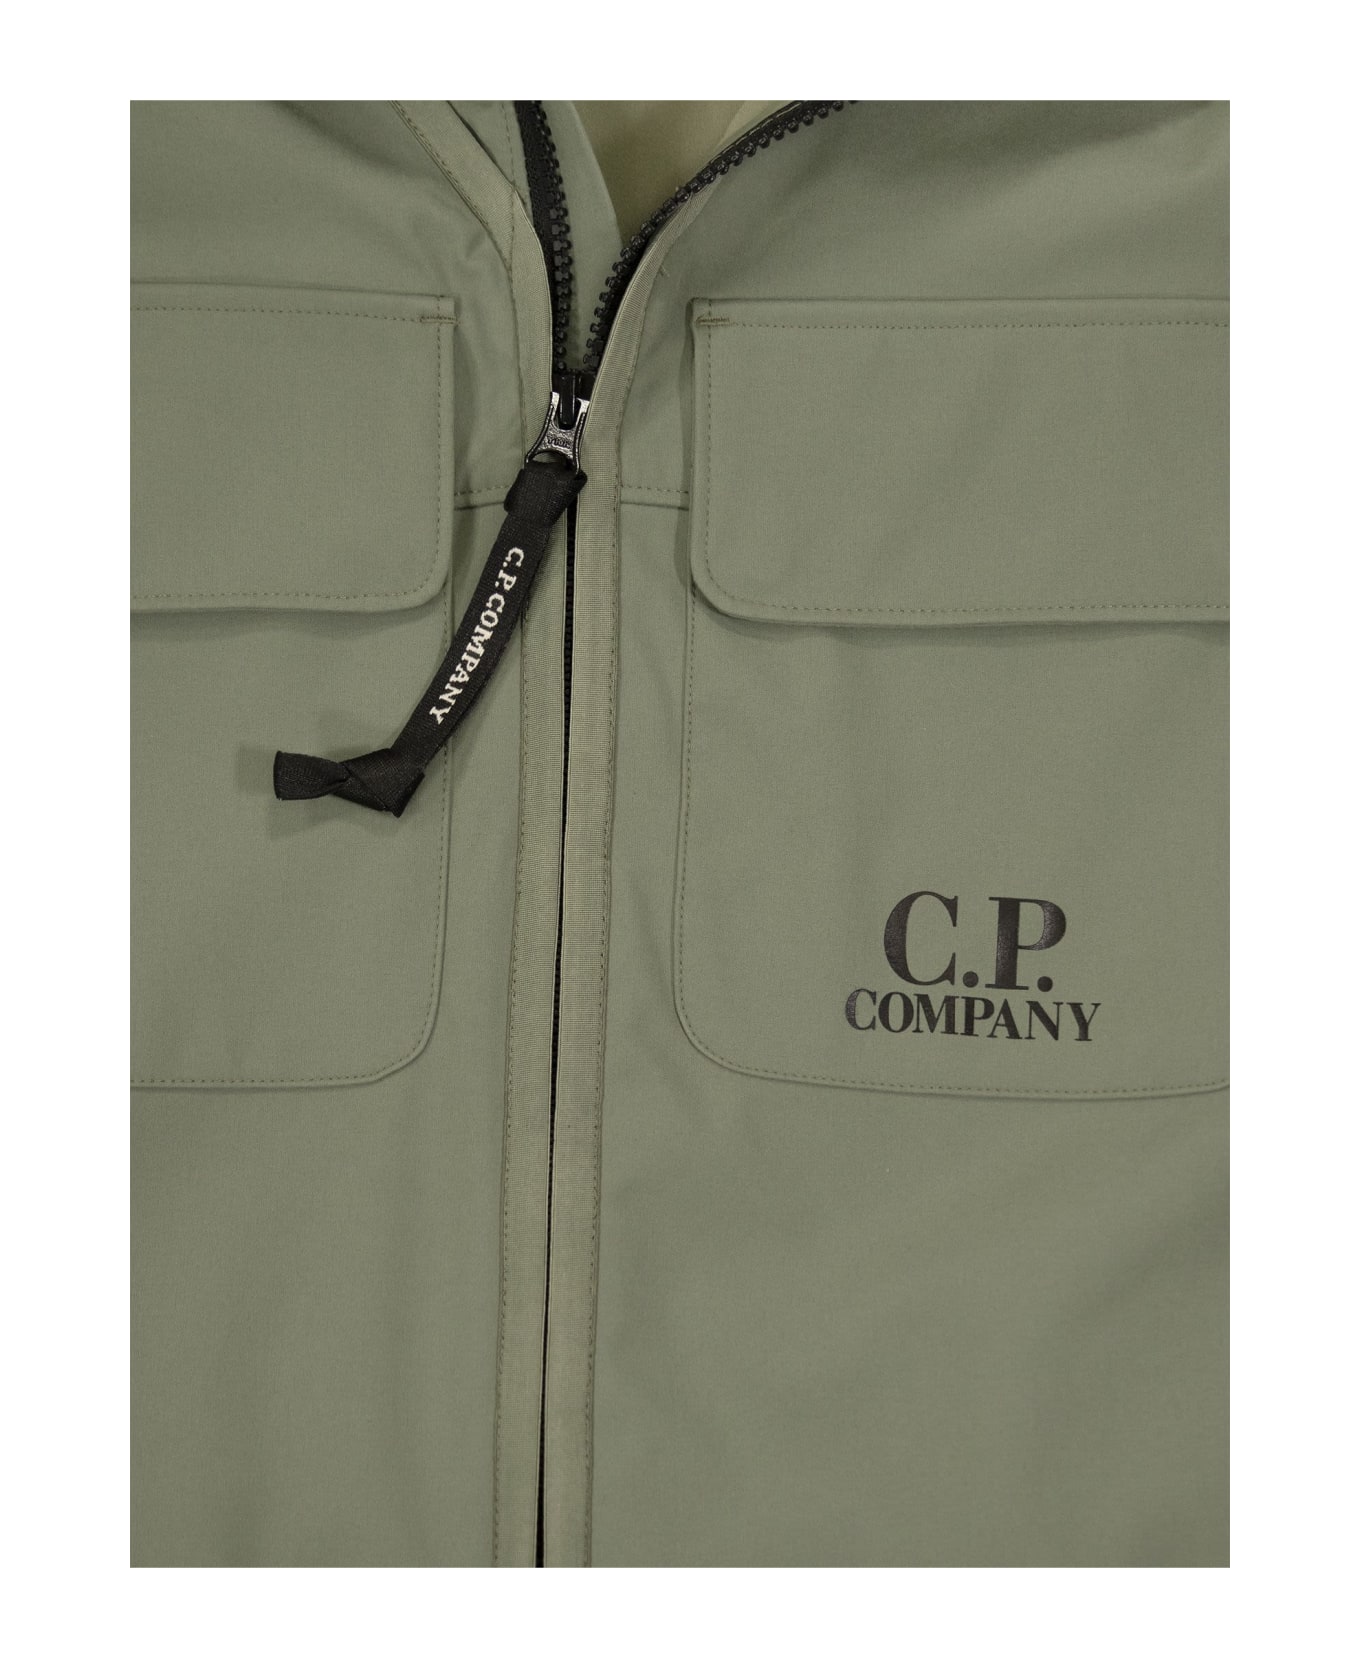 C.P. Company Goggle Hooded Vest - Green